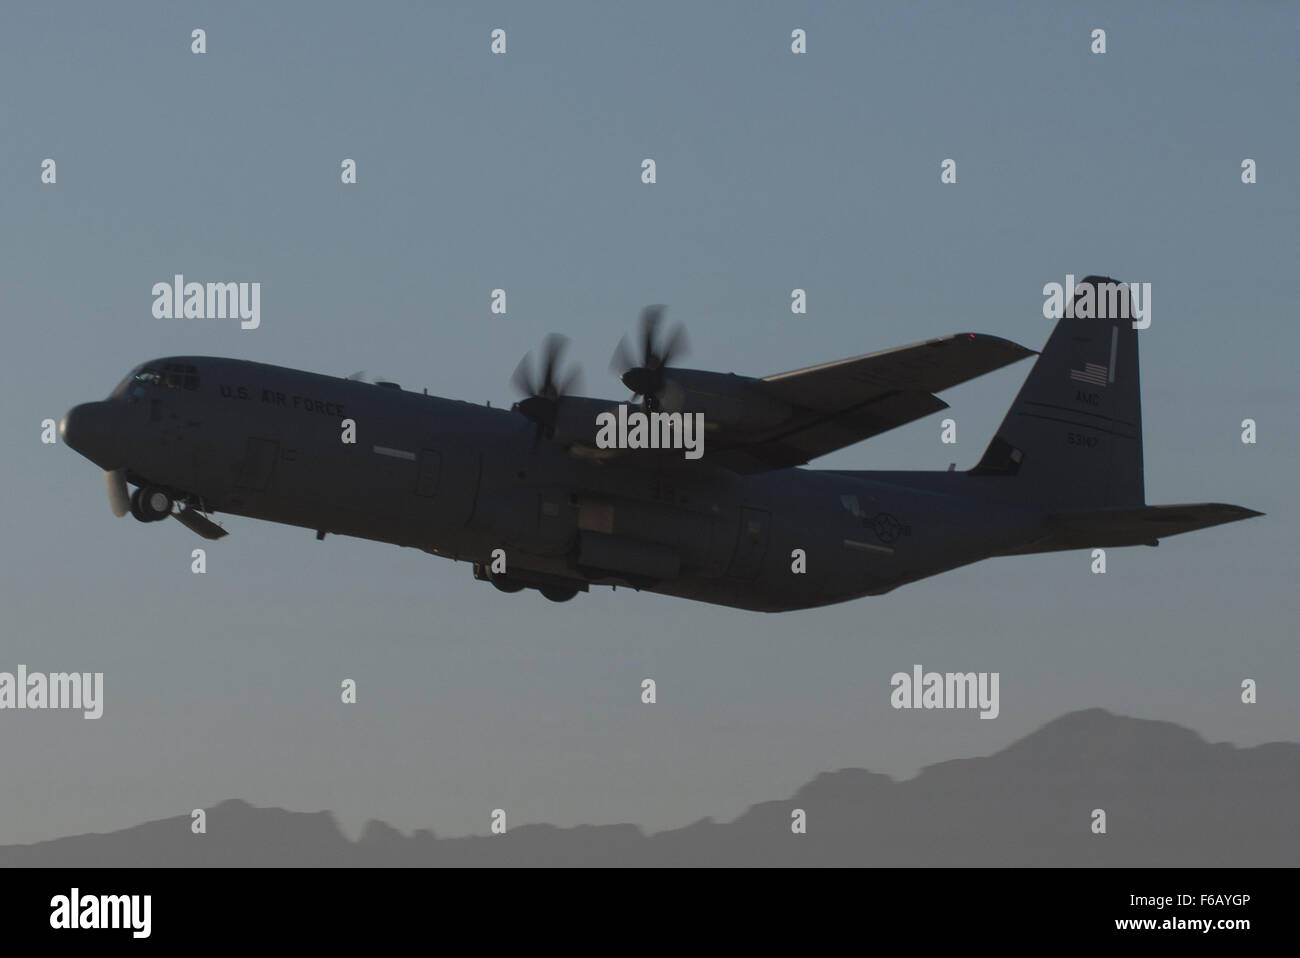 A U.S. Air Force C-130J Super Hercules aircraft assigned to the 774th Expeditionary Airlift Squadron takes off from Bagram Air Field, Afghanistan, Sept. 12, 2015. The aircraft and the rest of the squadron were in the process of redeploying back to Little Rock Air Force Base after successfully completing their deployment. During their rotation as the 774th Expeditionary Airlift Squadron, the Little Rock team completed 1,850 combat sorties and moved 14,500 passengers and 17 million pounds of cargo.  (U.S. Air Force photo by Tech. Sgt. Joseph Swafford/Released) Stock Photo